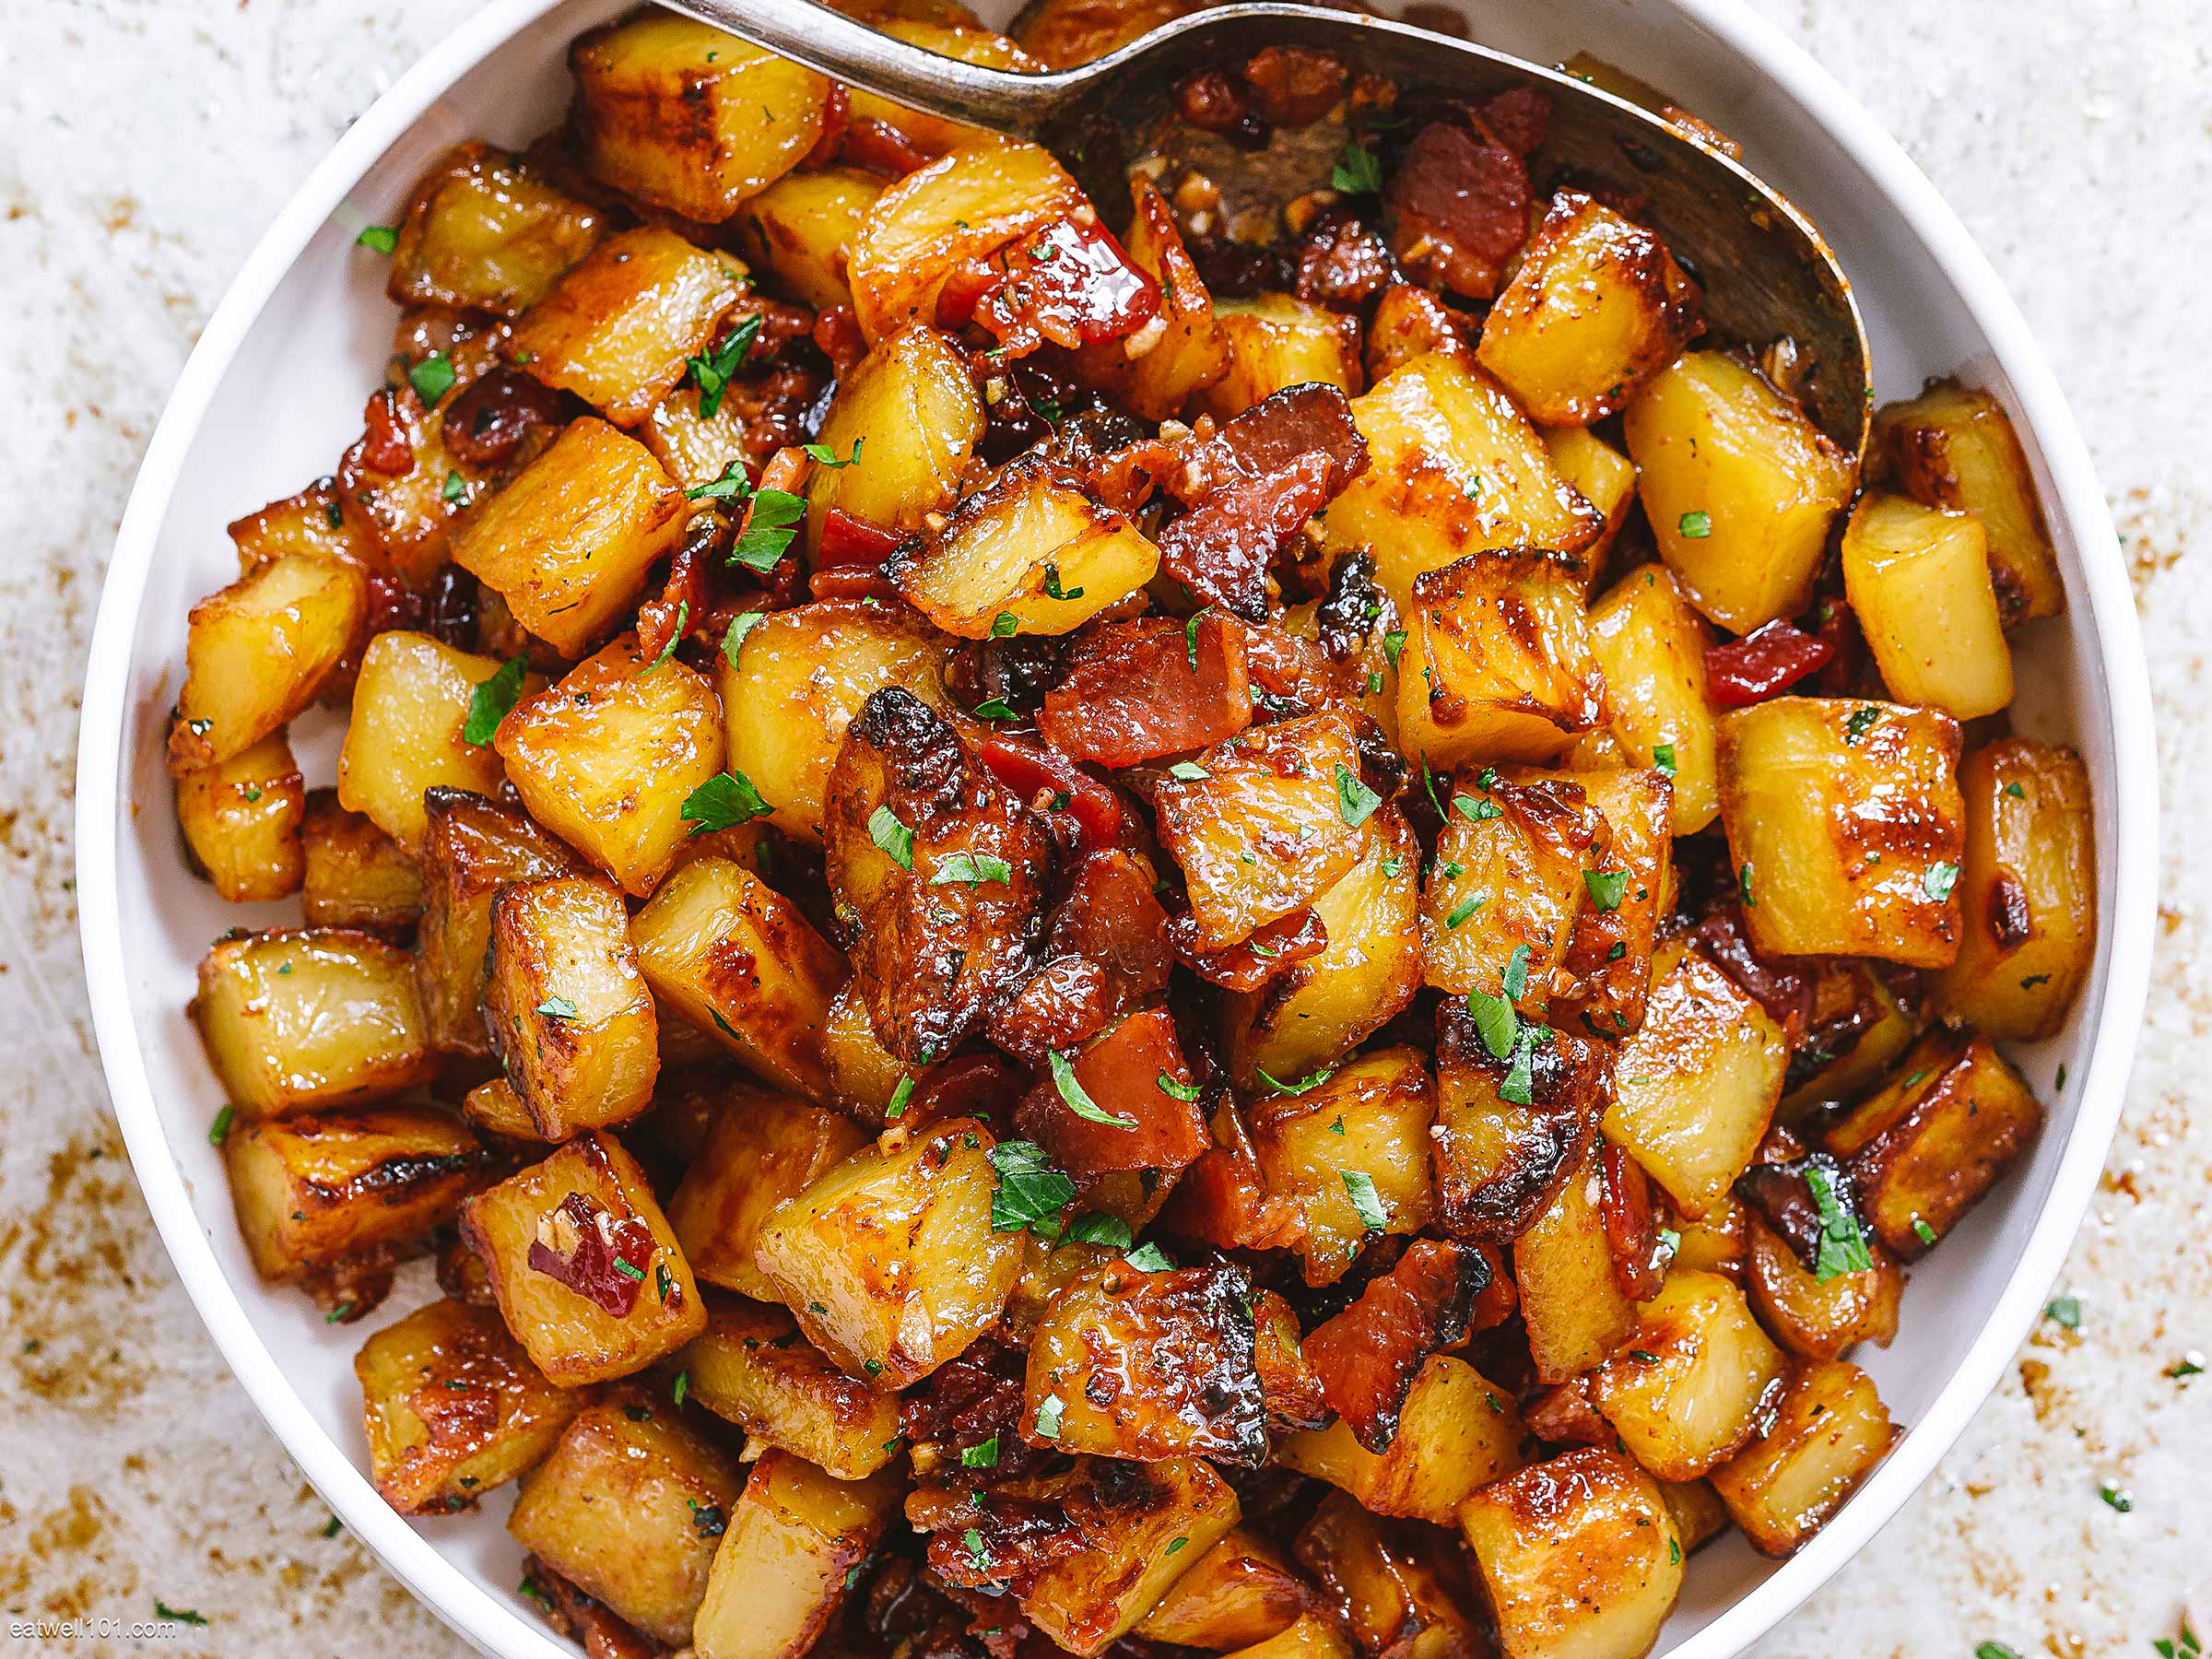 30 Potato Recipes That Go With Pretty Much Any Meal!